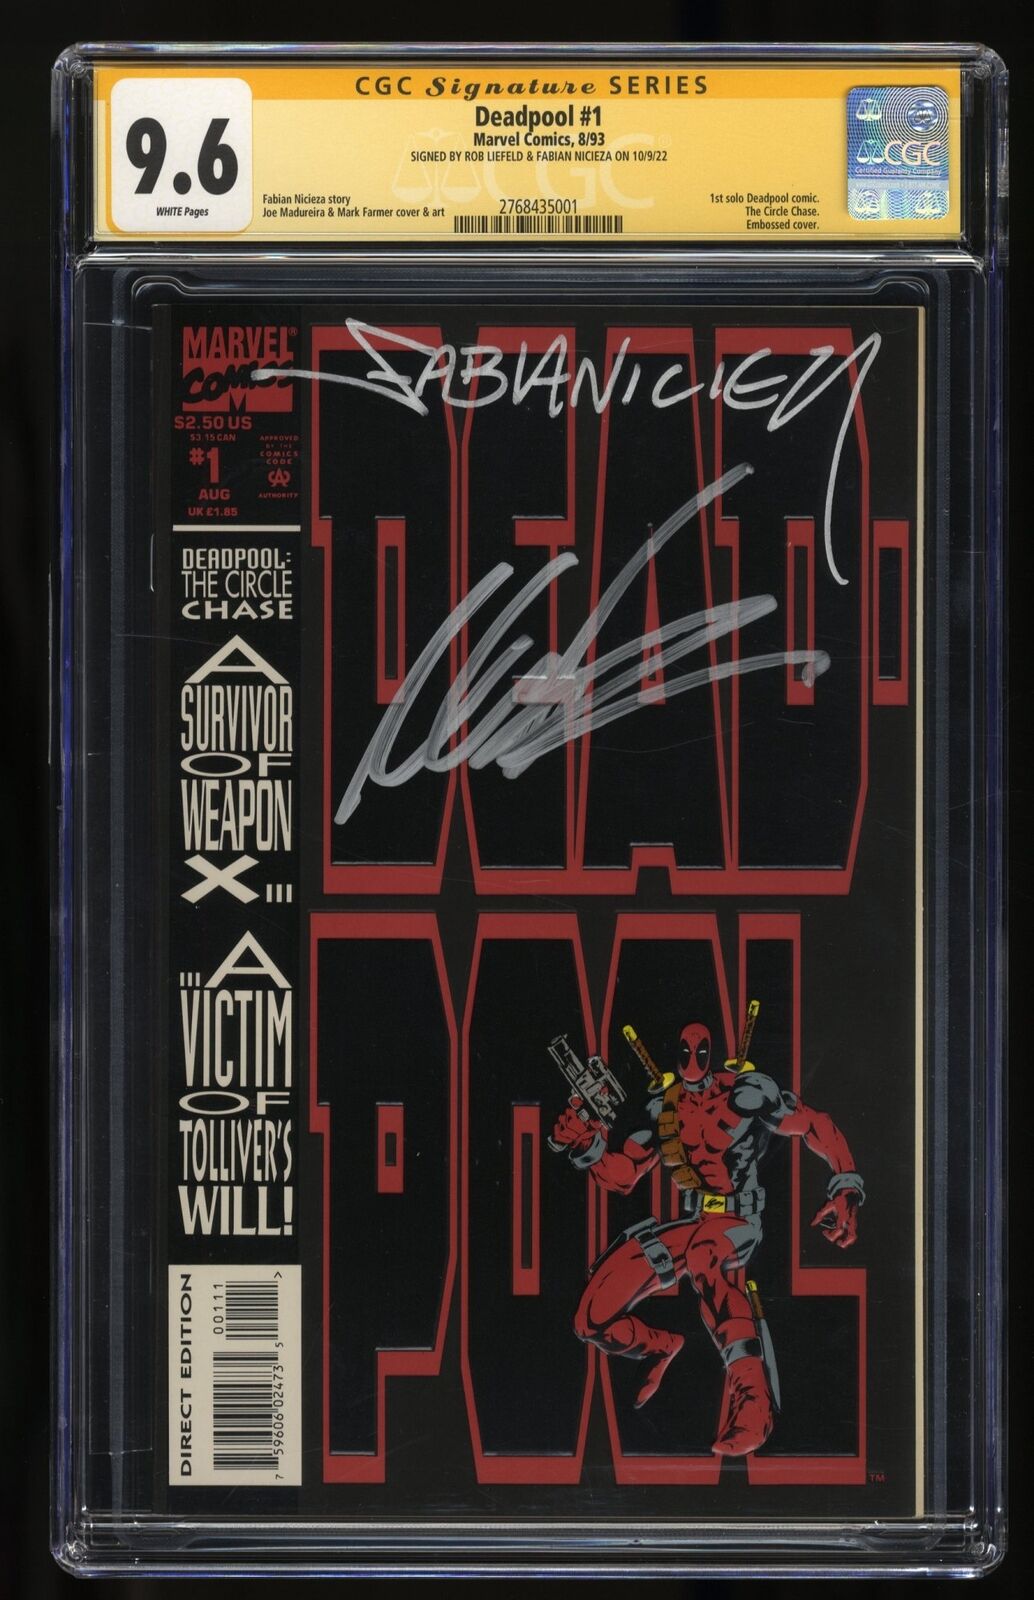 Deadpool: The Circle Chase (1993) #1 CGC NM+ 9.6 SS Signed Liefeld Nicieza